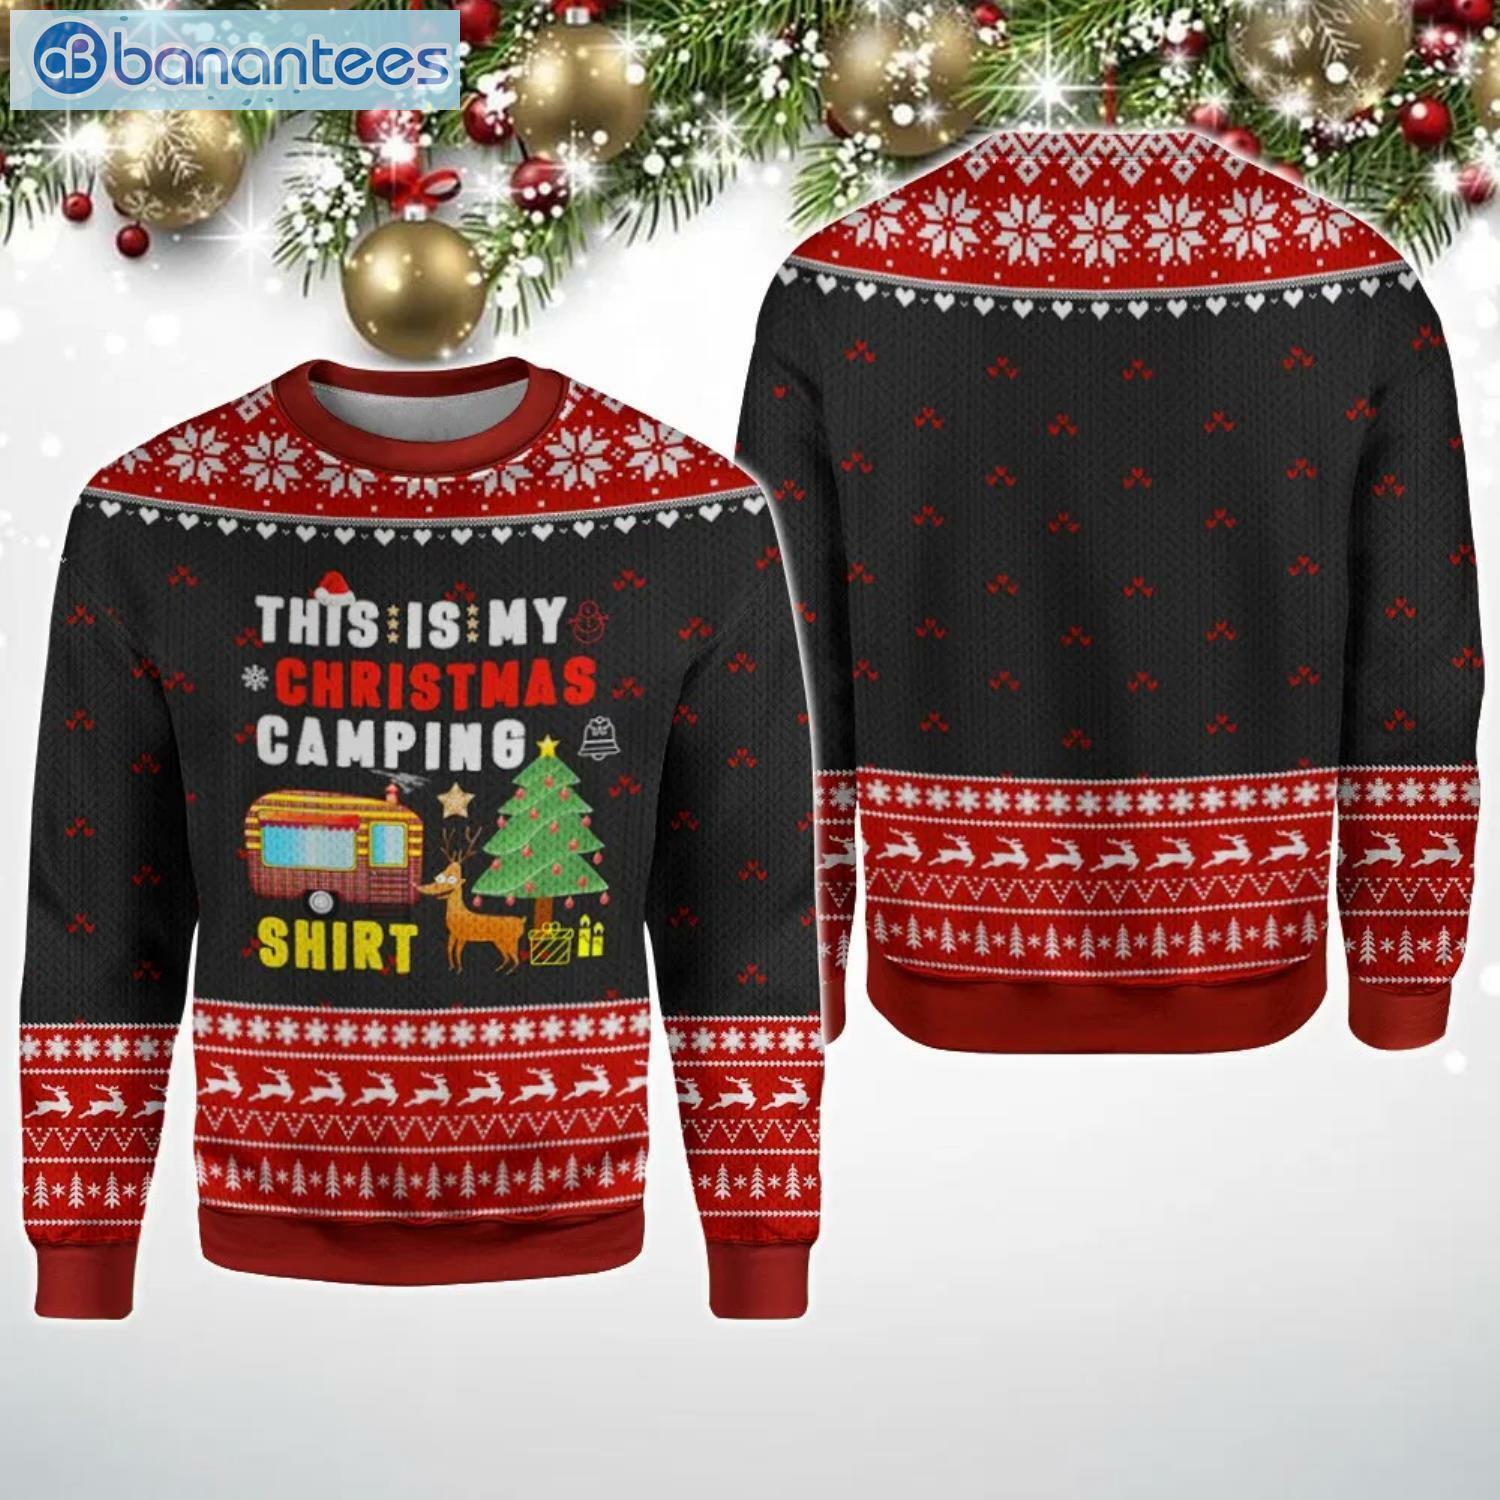 This Is My Camping Christmas Ugly Sweater Product Photo 1 Product photo 1